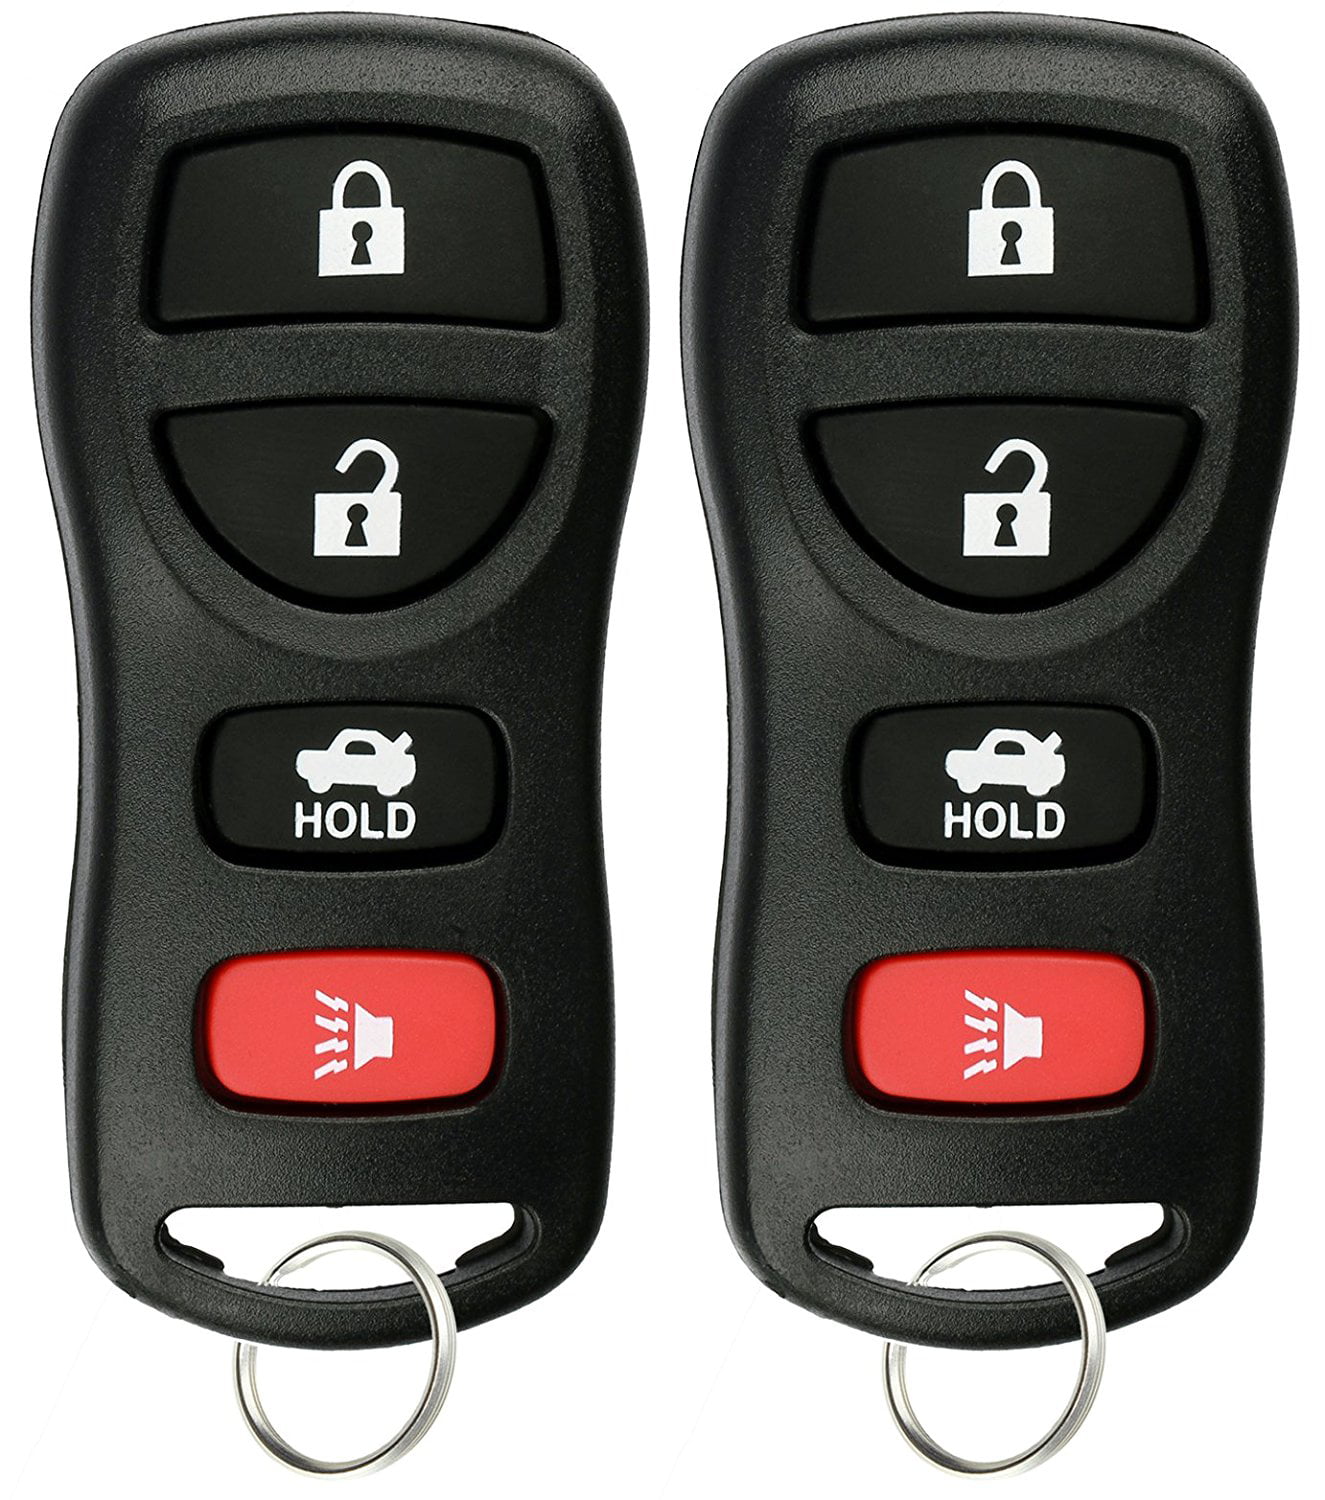 Set 2 Remote Fob Transmitter Clicker Control Alarm Keyless Entry Key Replacement 